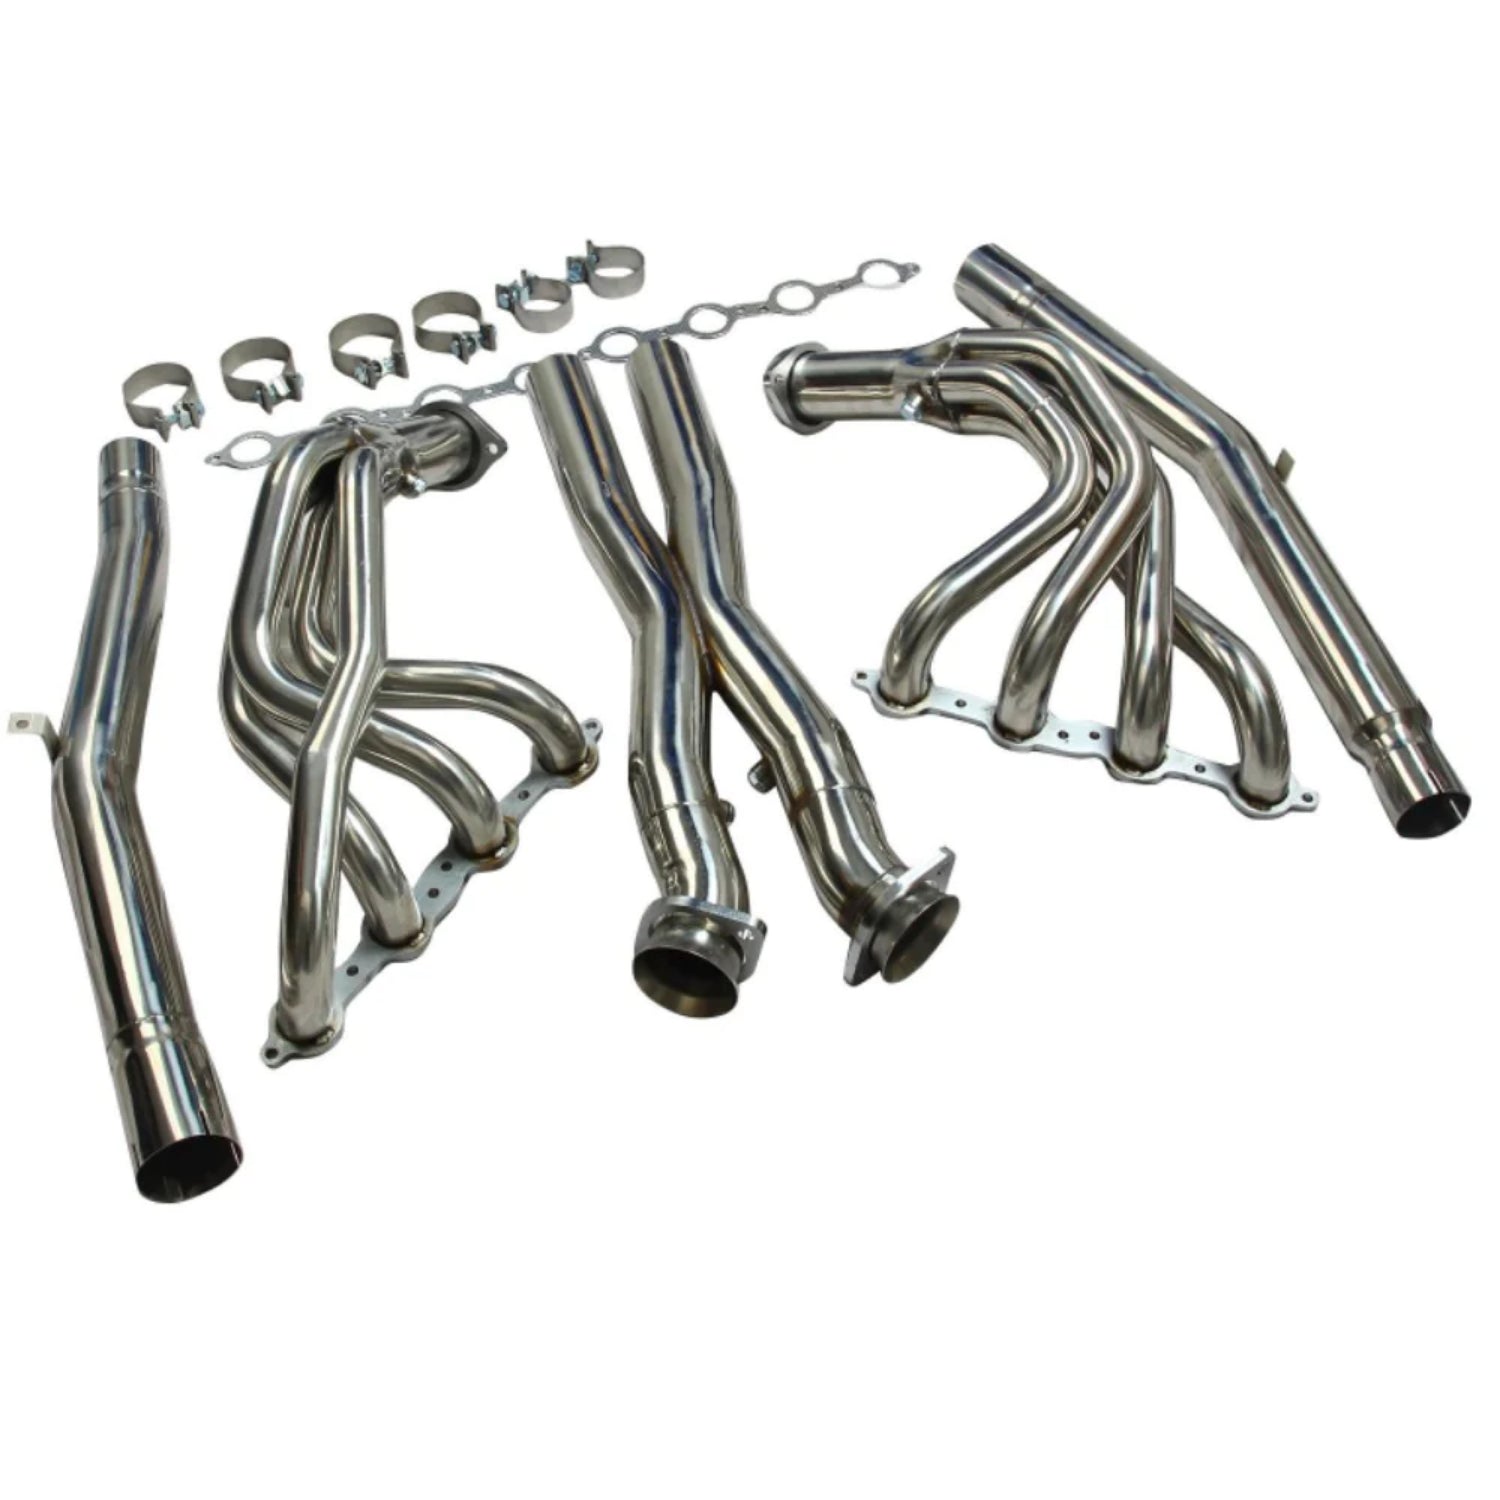 Stainless Exhaust Headers Manifolds & X Pipe for 2005-2013 Chevy Corvette C6 LS2 LS3